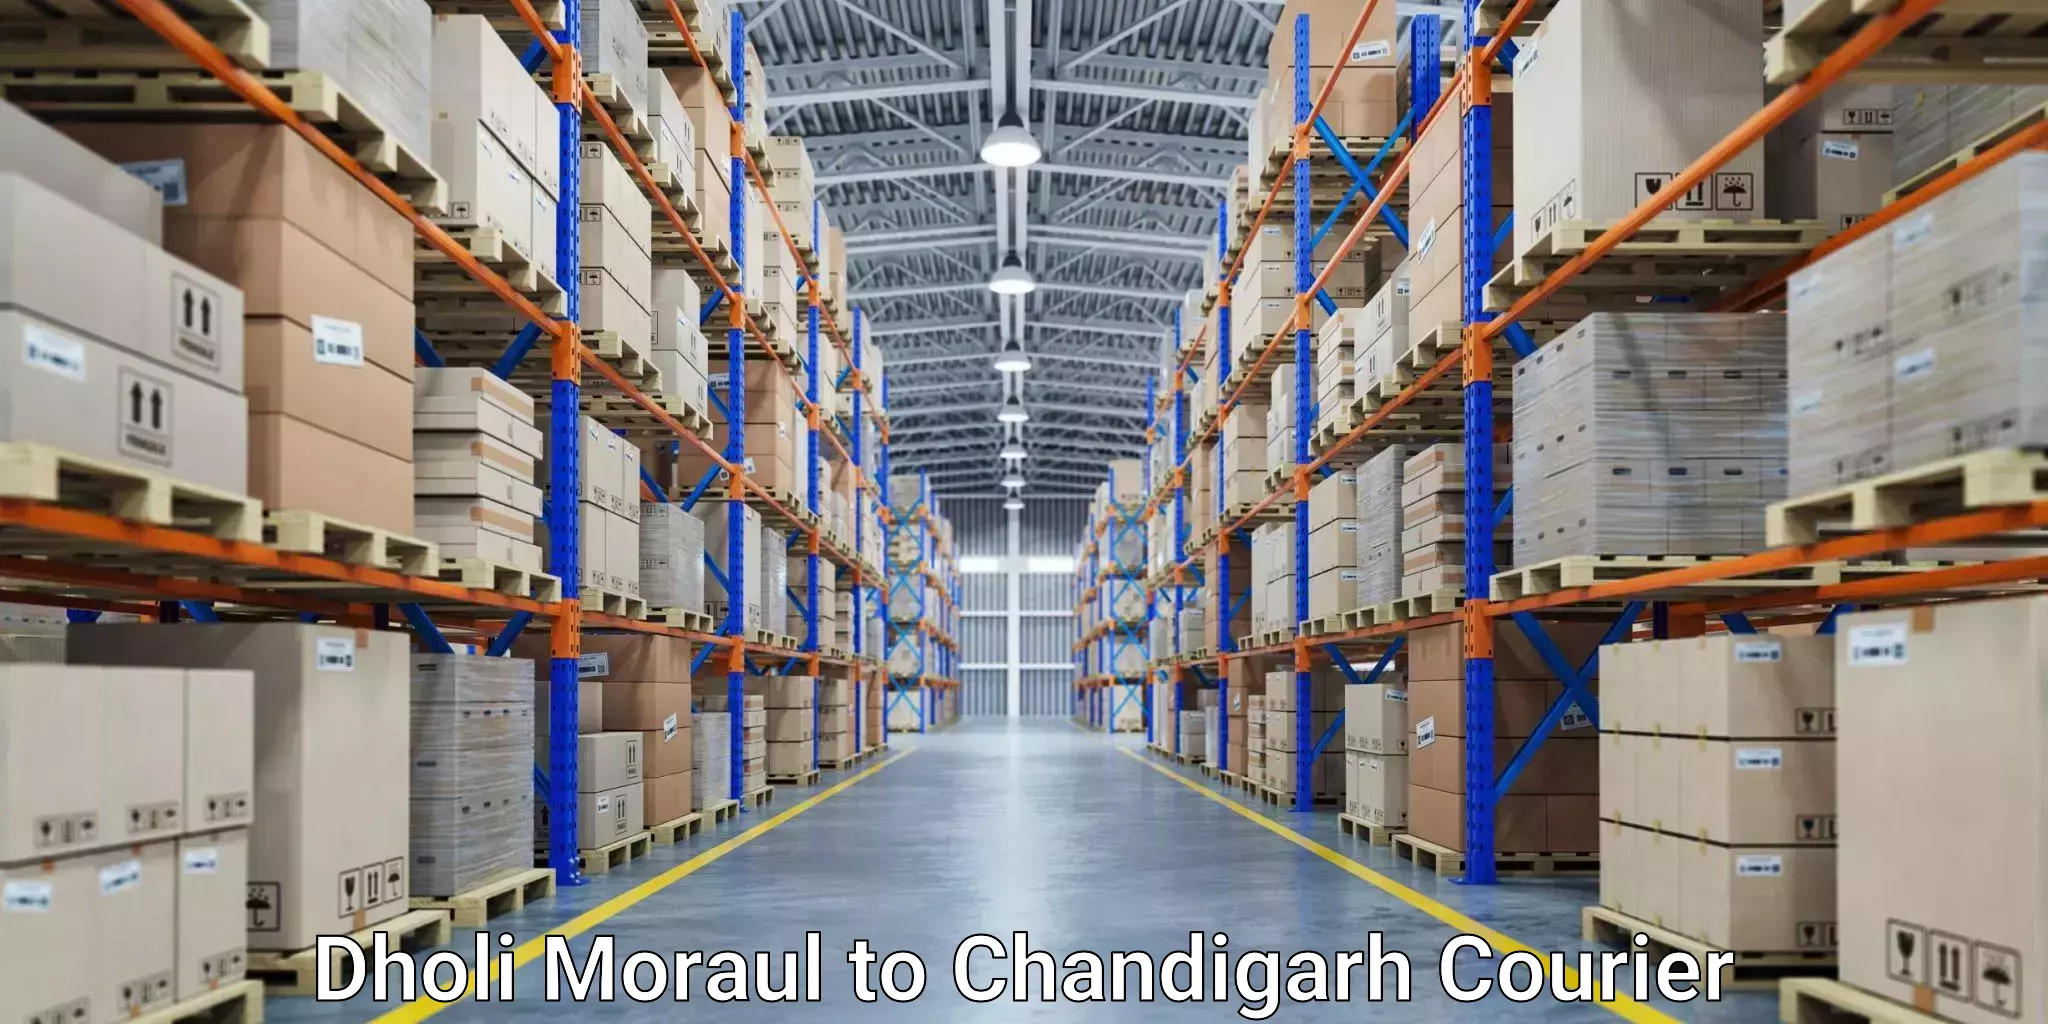 Fast shipping solutions Dholi Moraul to Chandigarh